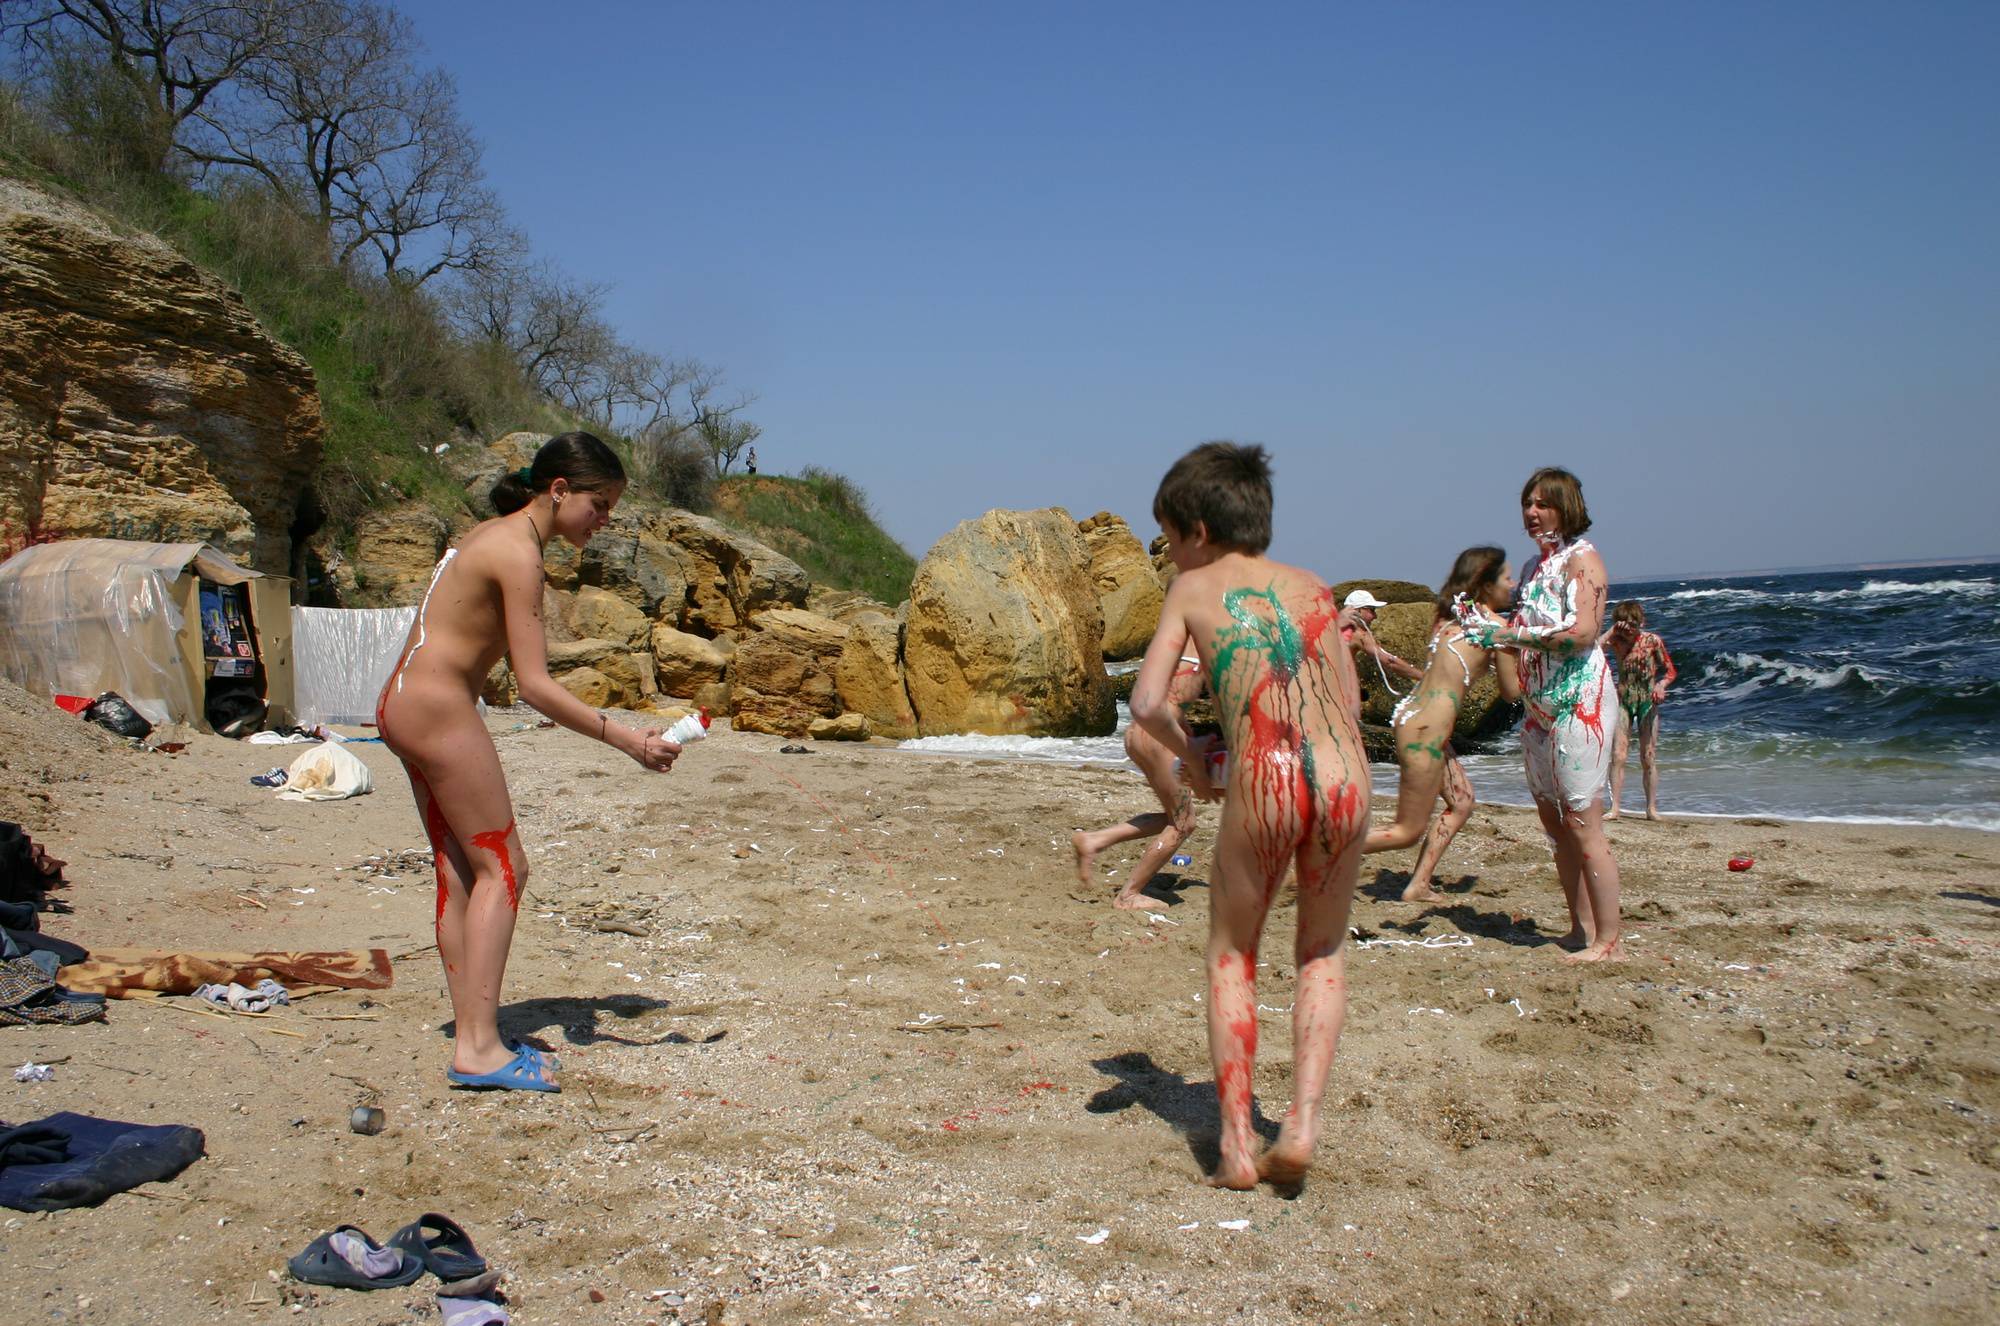 Pure Nudism Images-Beach Paint Fight Initiation - 3